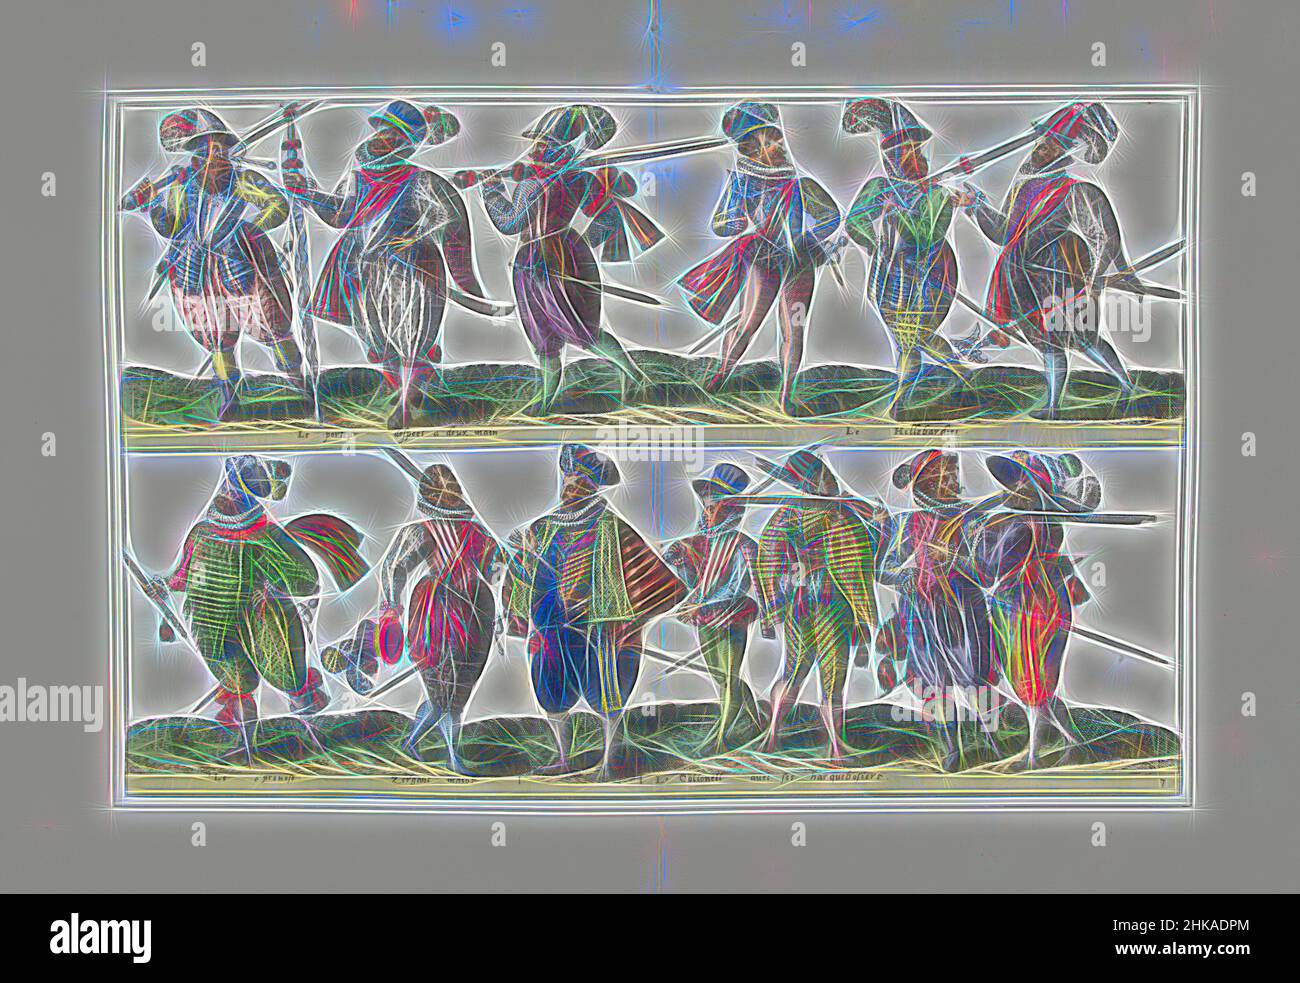 Inspired by Double plate with thirteen armed citizens in uniform according to the fashion in Antwerp, ca. 1580, Bourgeois d'Anvers, sous les armes (Fin.), Double plate with thirteen armed citizens in uniform according to the fashion in Antwerp, ca. 1580. Part of the series Habitus Variarum Gentium, Reimagined by Artotop. Classic art reinvented with a modern twist. Design of warm cheerful glowing of brightness and light ray radiance. Photography inspired by surrealism and futurism, embracing dynamic energy of modern technology, movement, speed and revolutionize culture Stock Photo